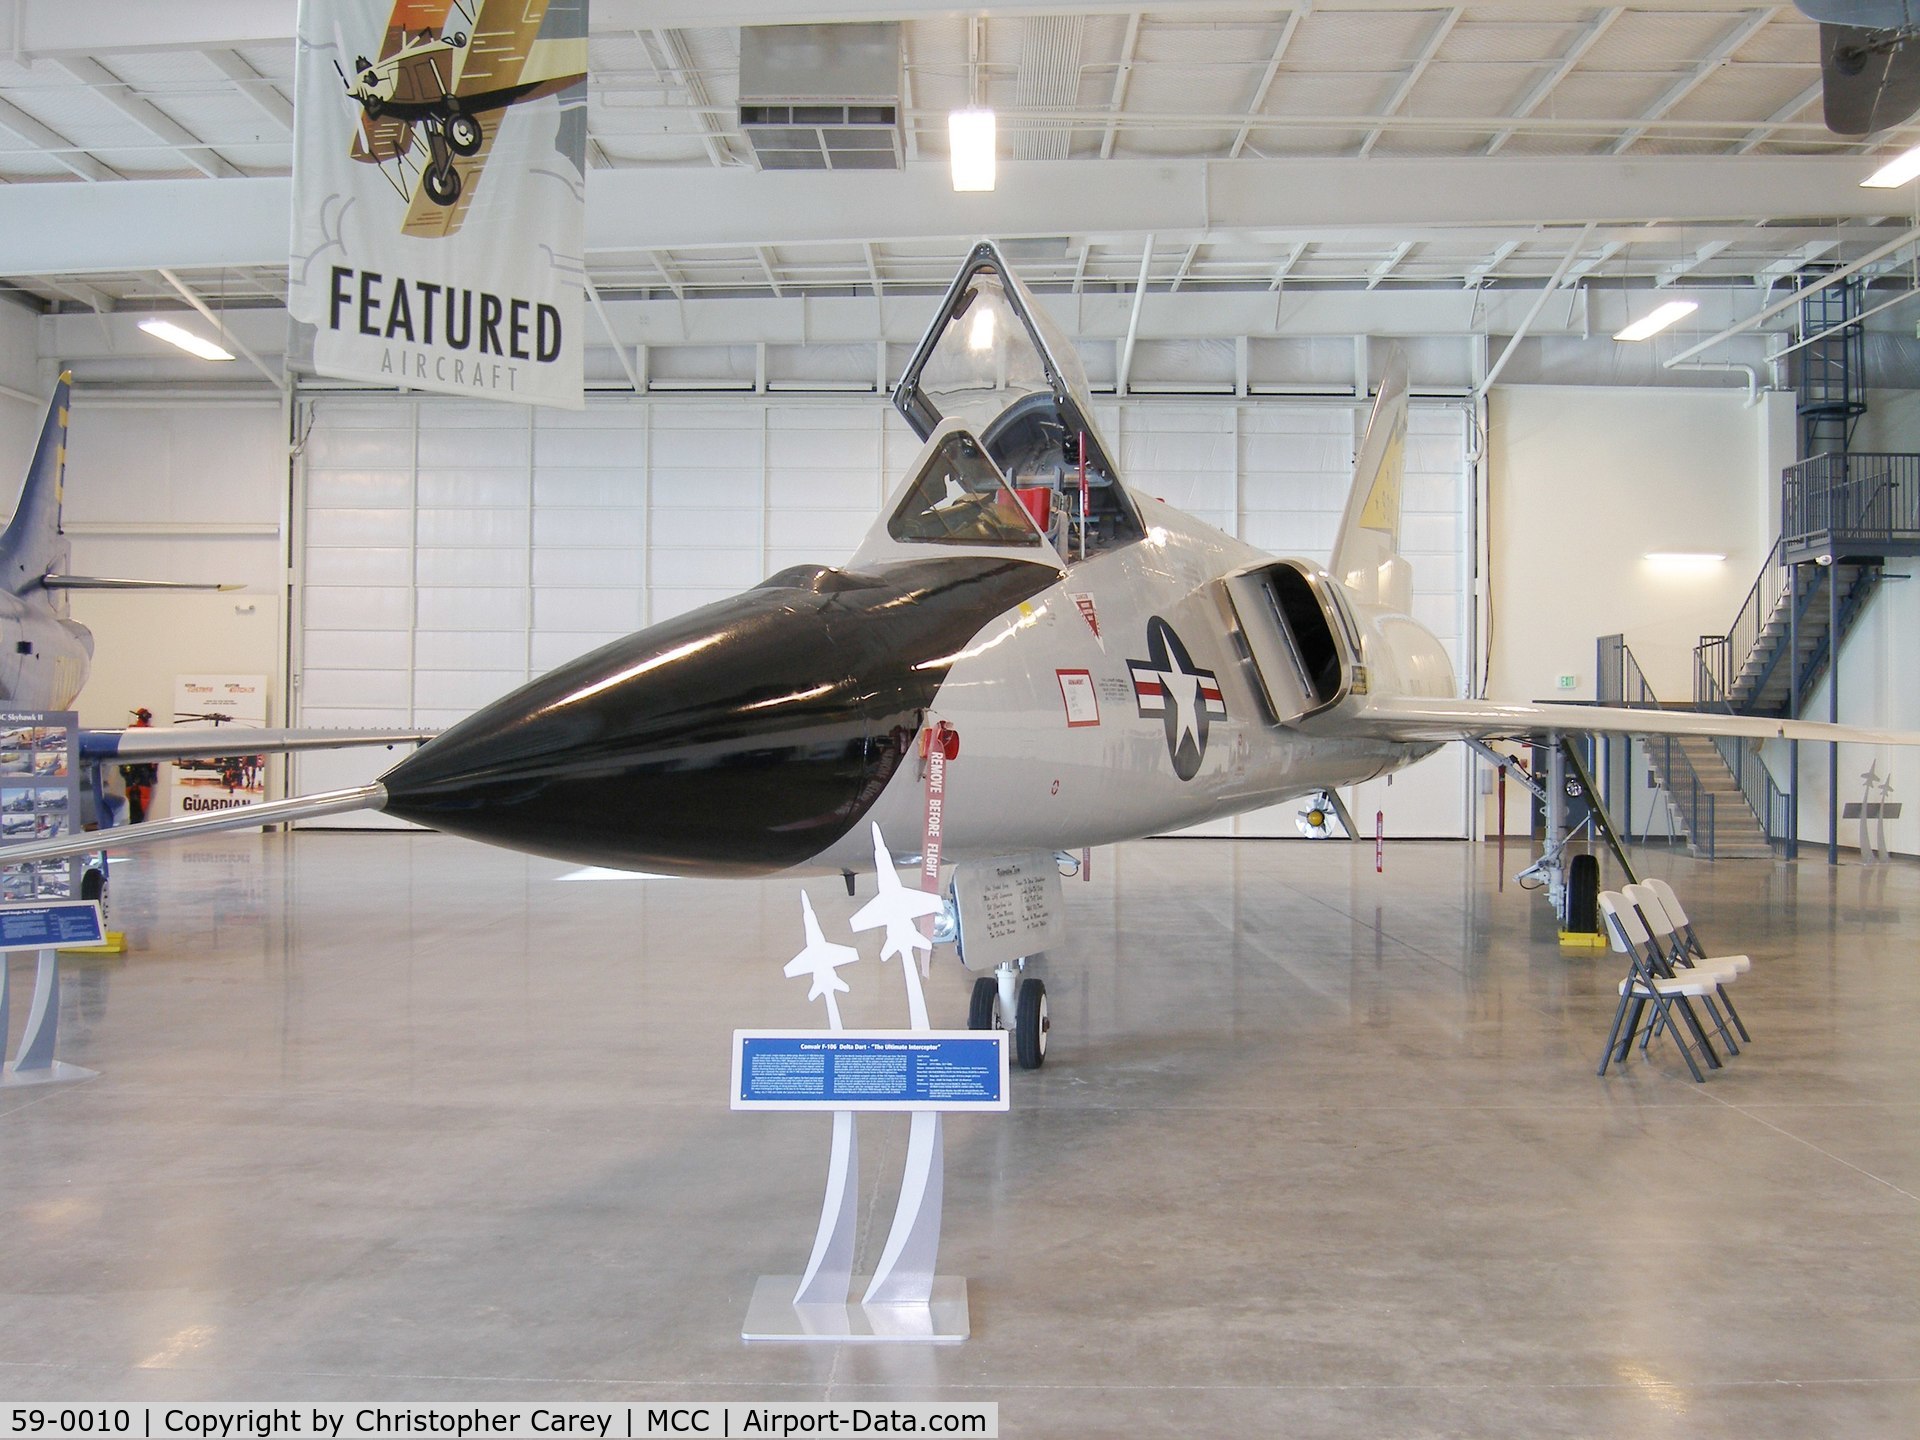 59-0010, 1959 Convair F-106A Delta Dart C/N 8-24-139, Fully restored, today 59-0010 sits proudly at the Aerospace Museum of California (Sacramento, CA) in the museum's large air park, along with over 40 other display aircraft. The museum is regarded as one of the finest aviation museums in the State,